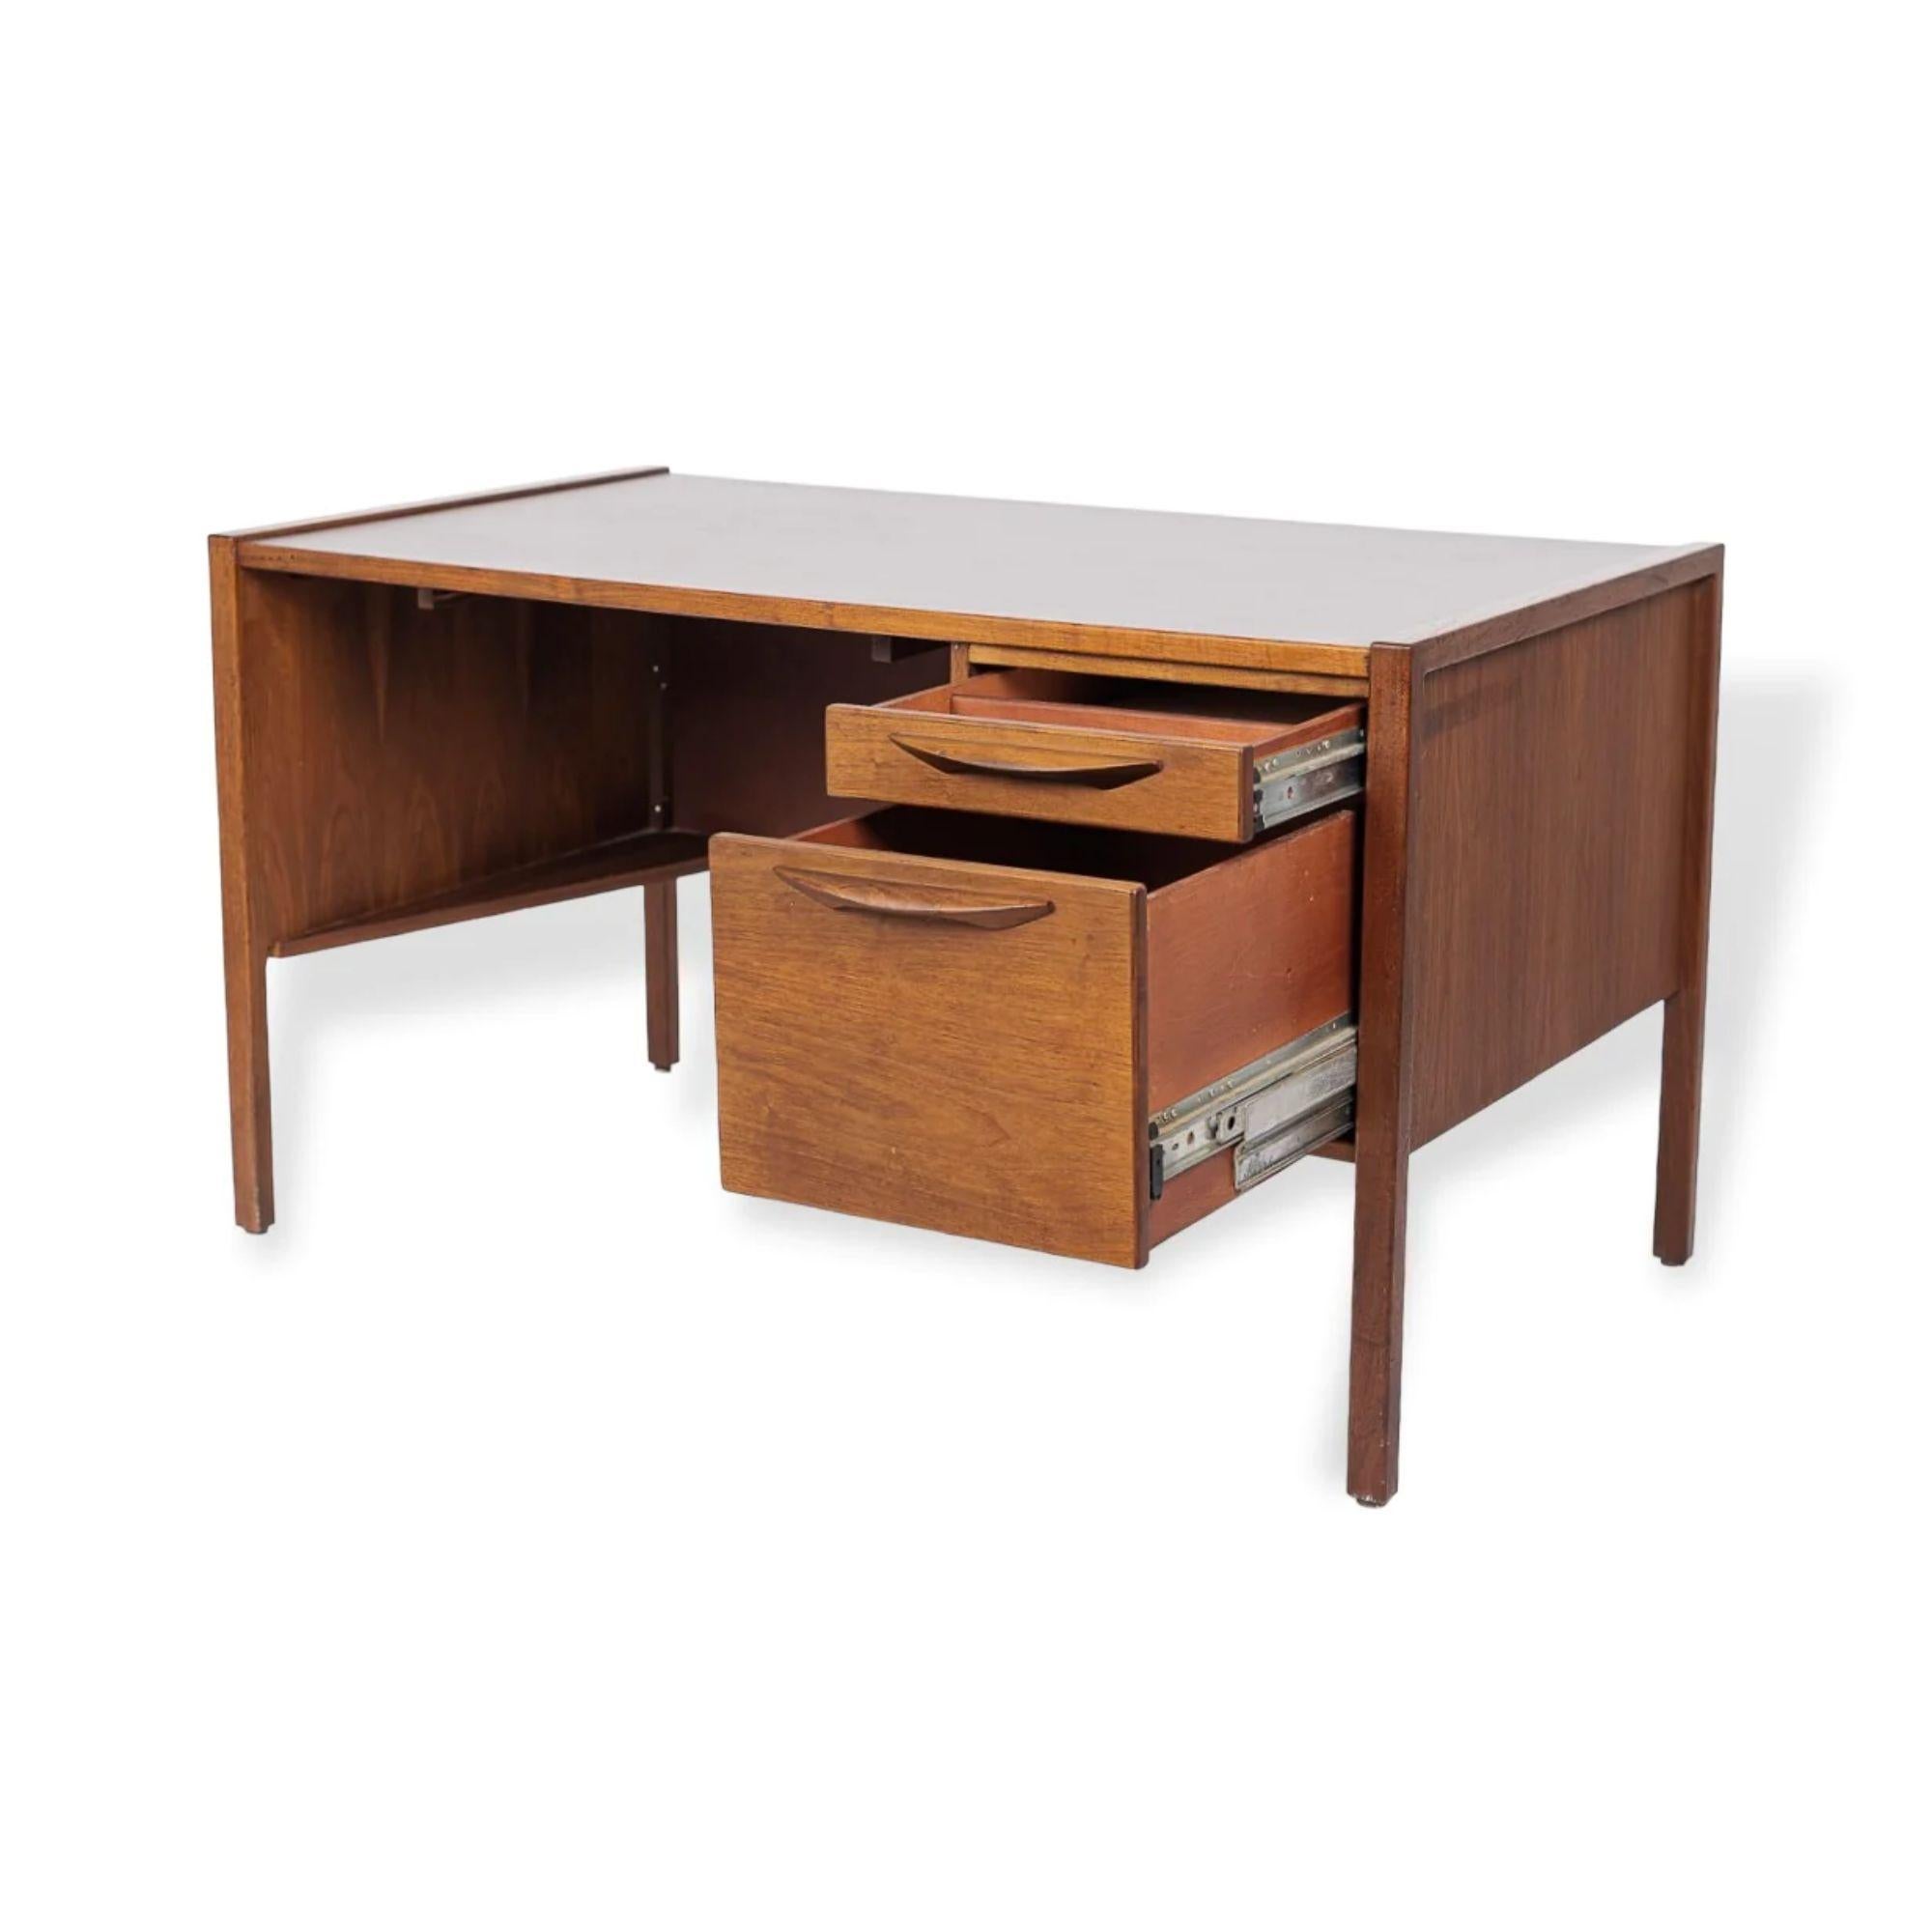 American 1960s Midcentury Desk in Wood & Laminate by Jens Risom For Sale